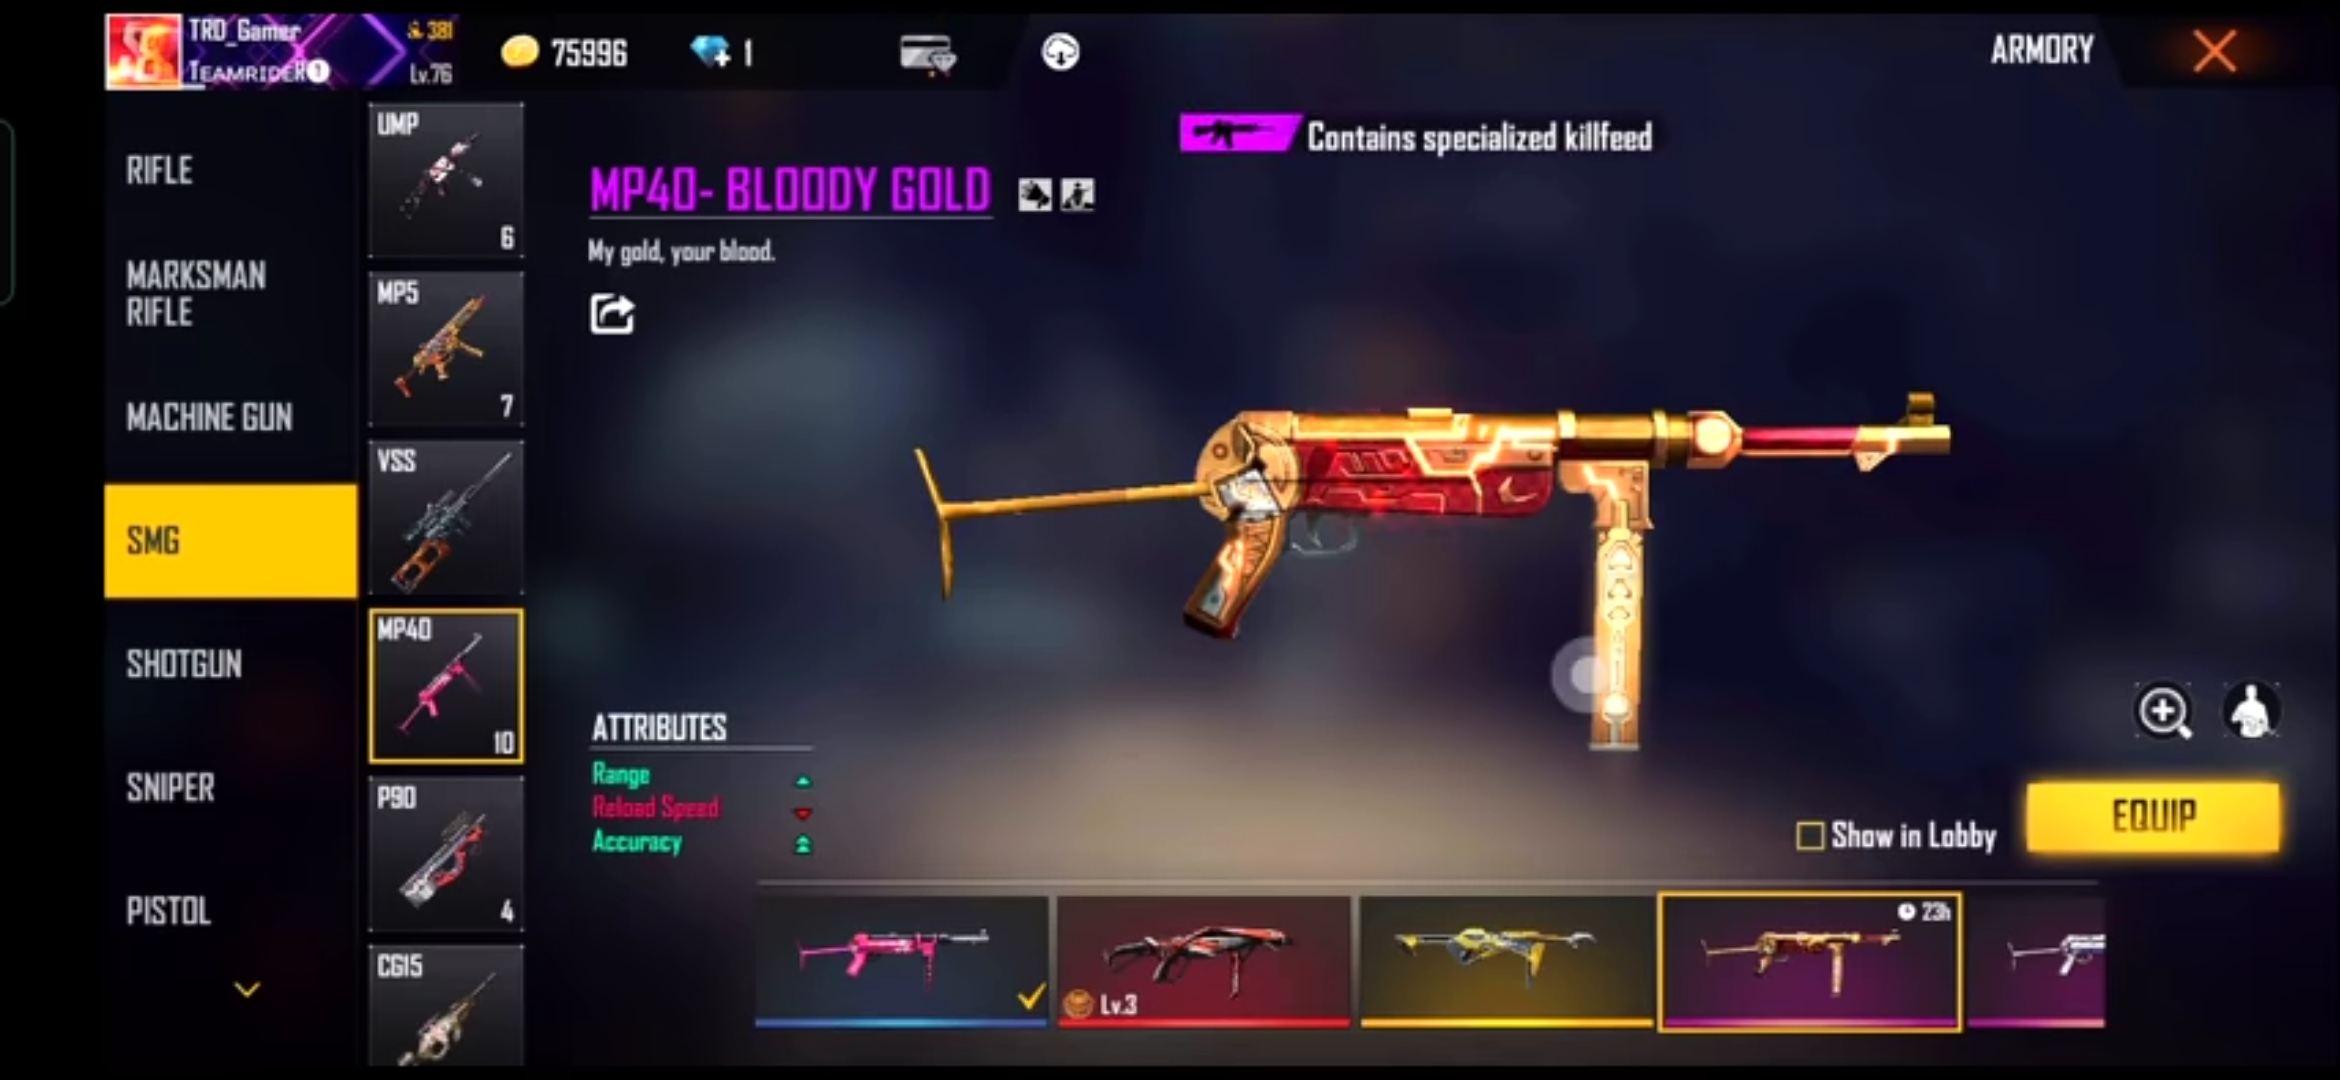 MP40-BLOODY GOLD ATTRIBUTES